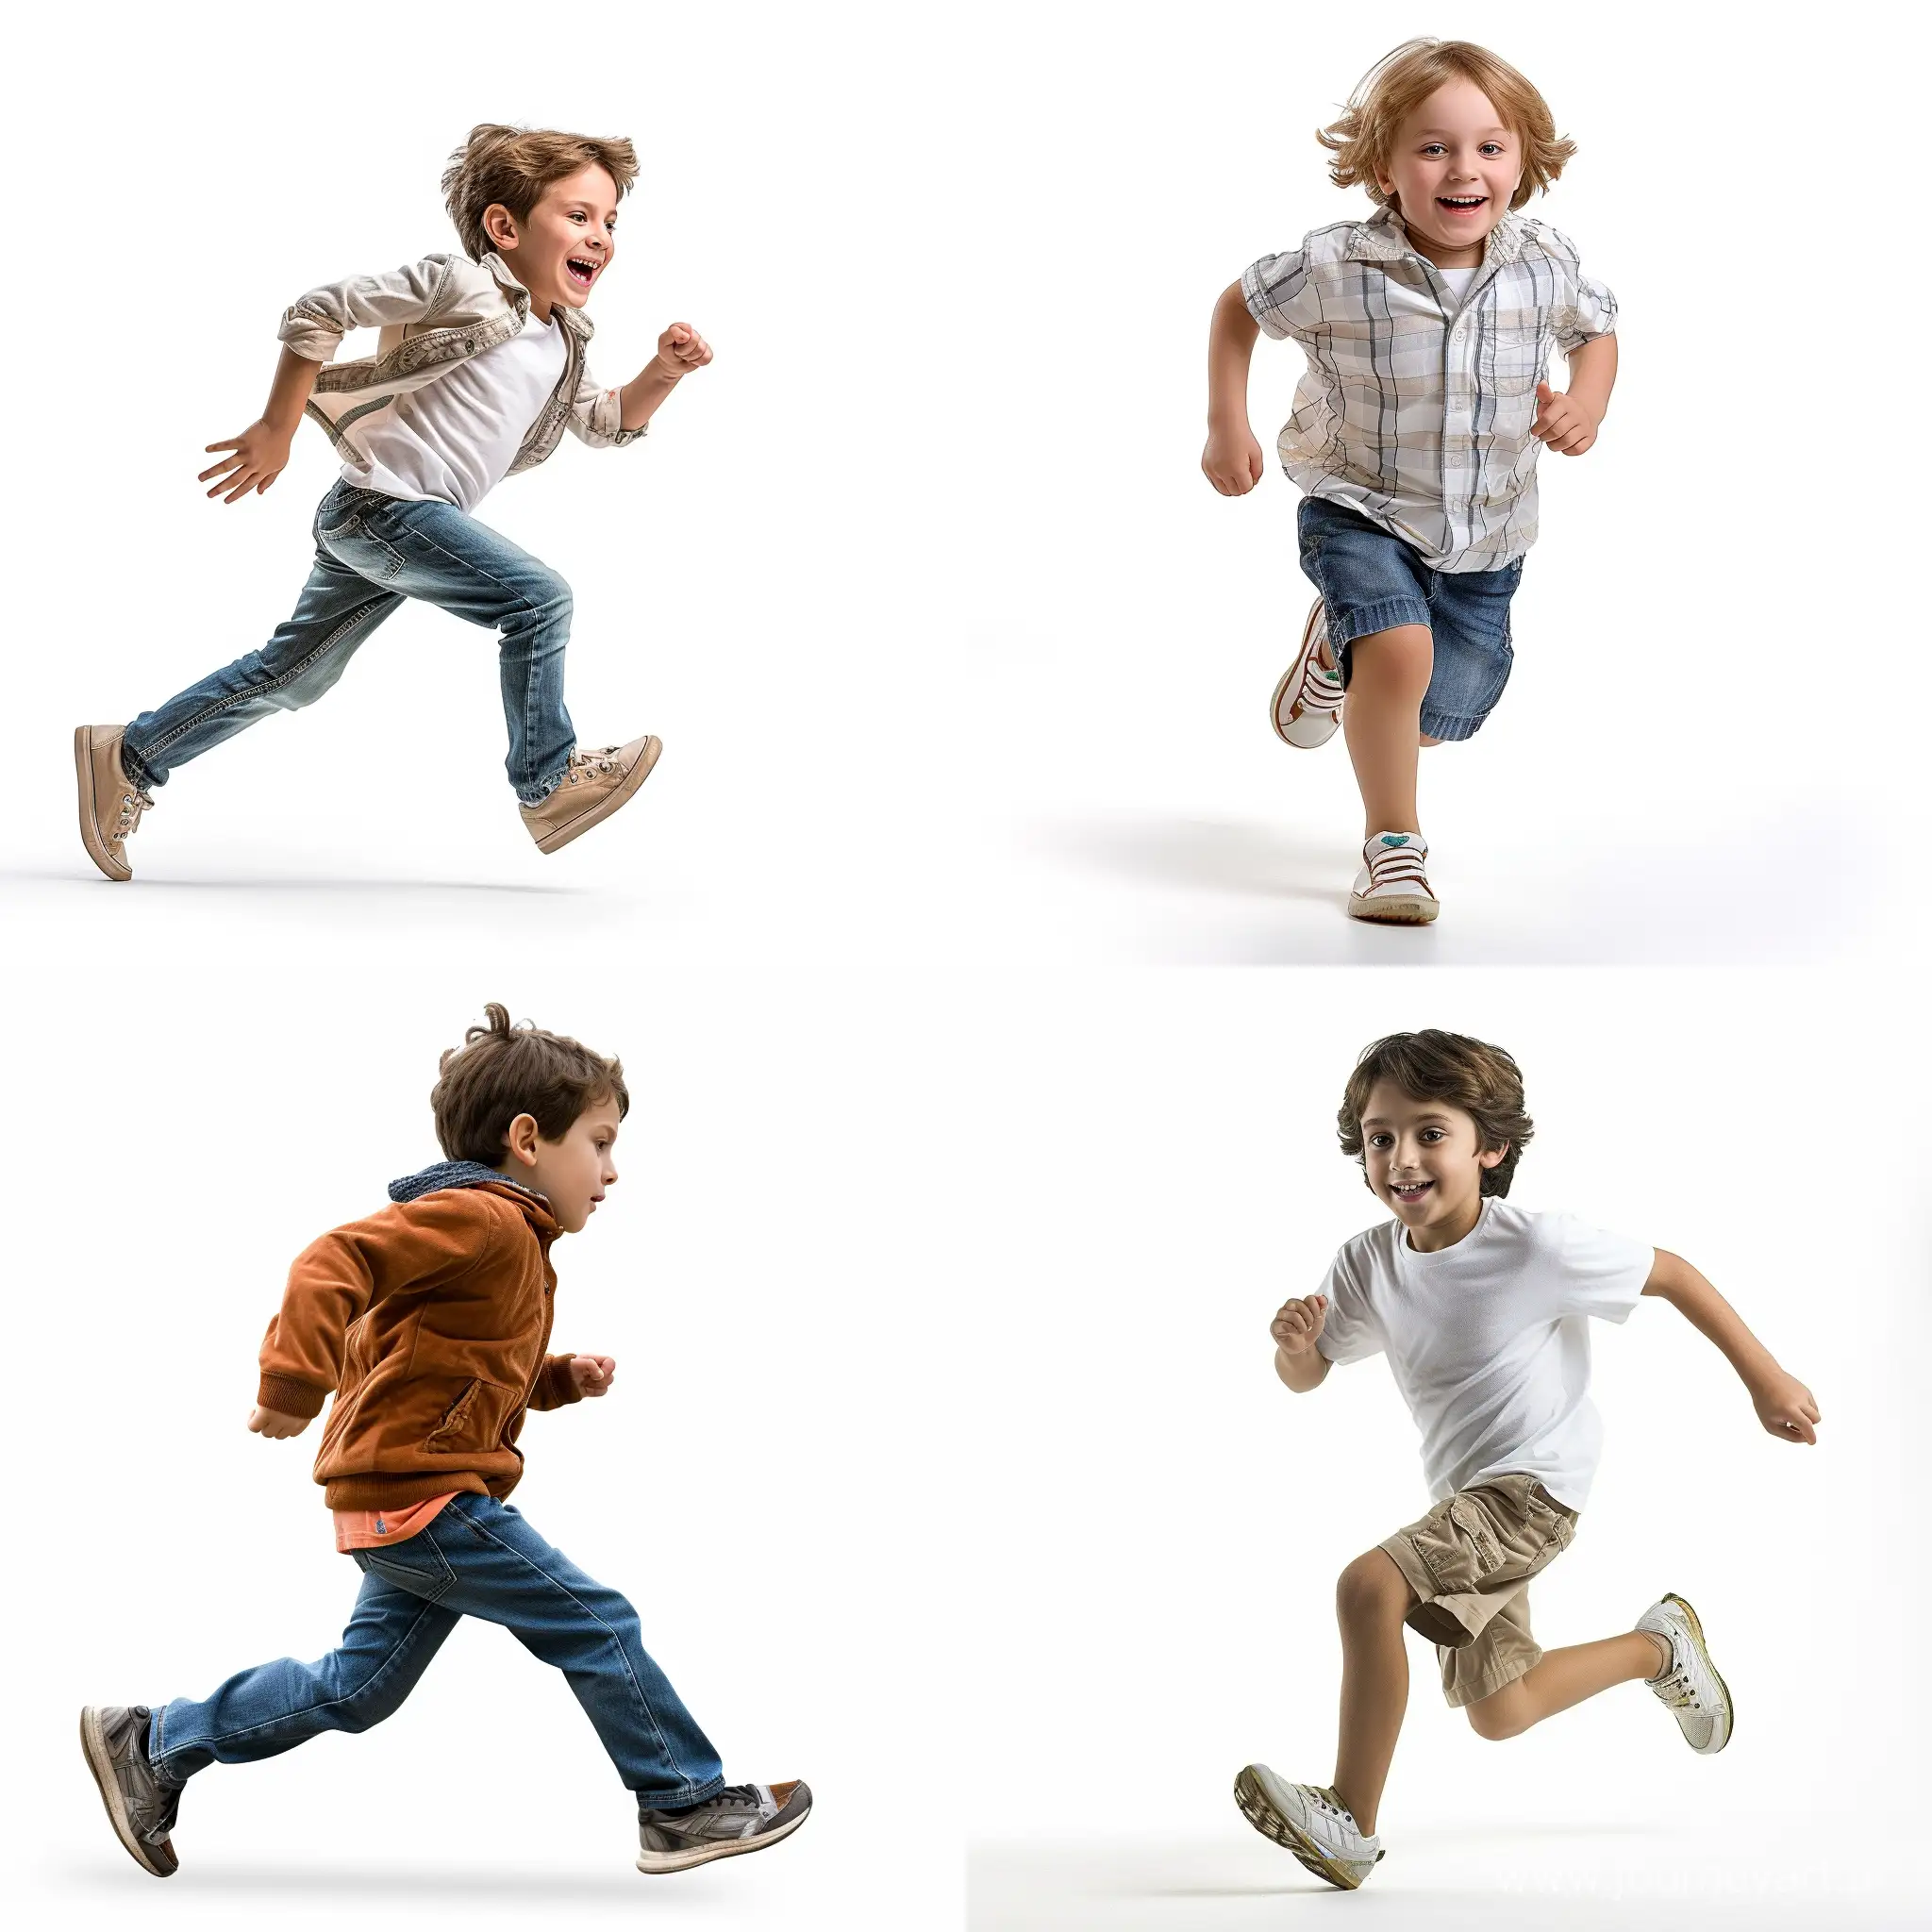 Energetic-Child-Running-Against-a-Clean-White-Background